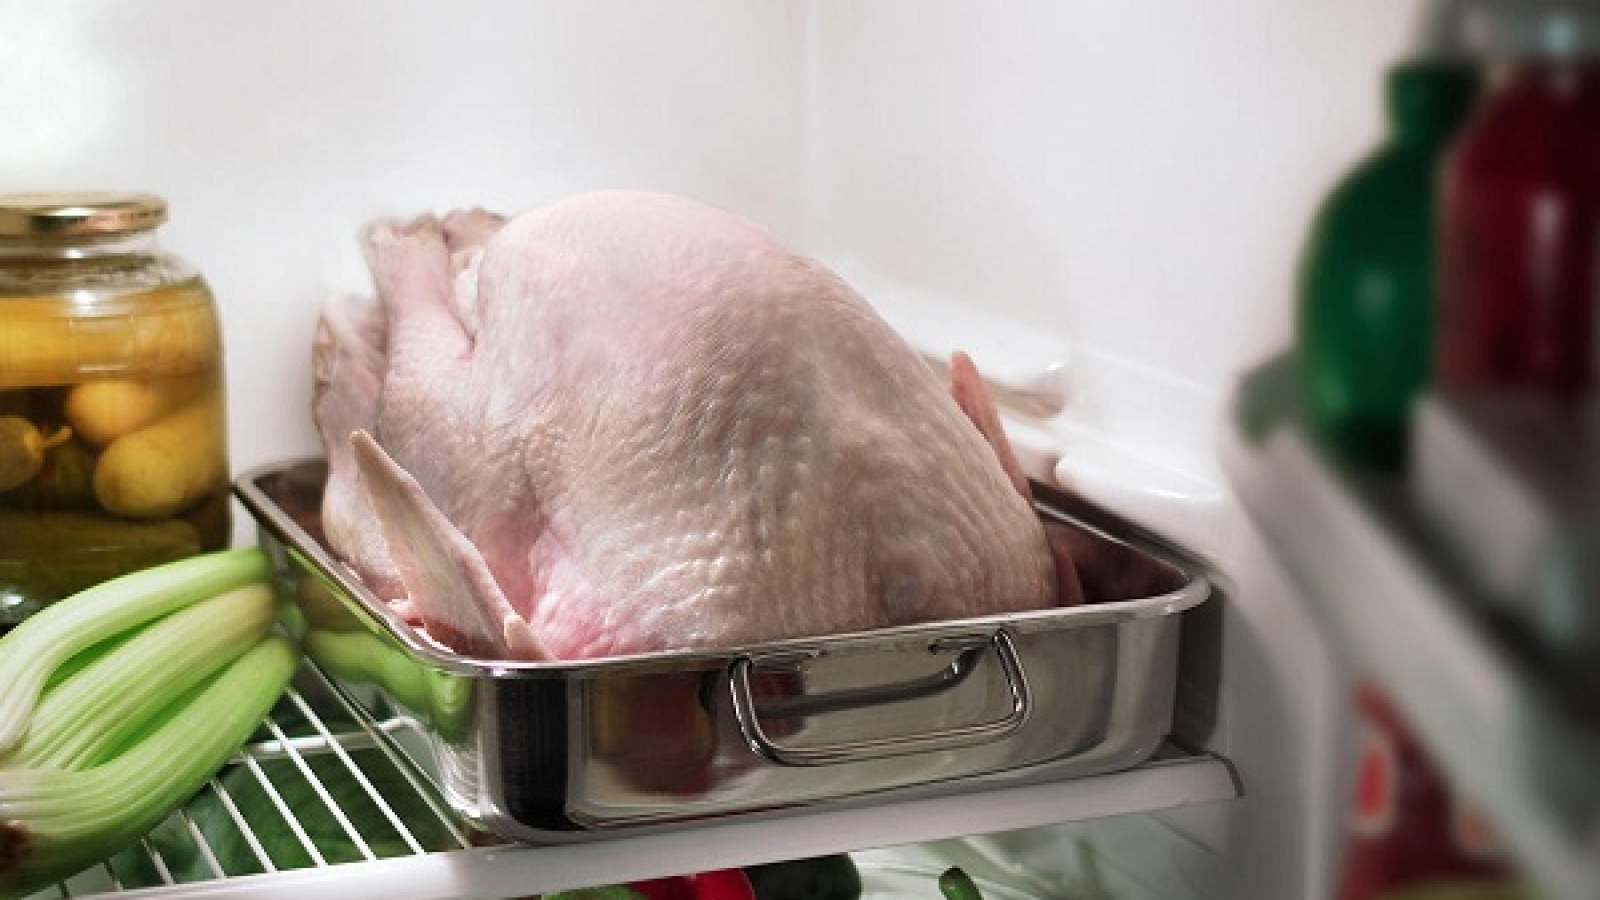 How long can you keep a frozen turkey